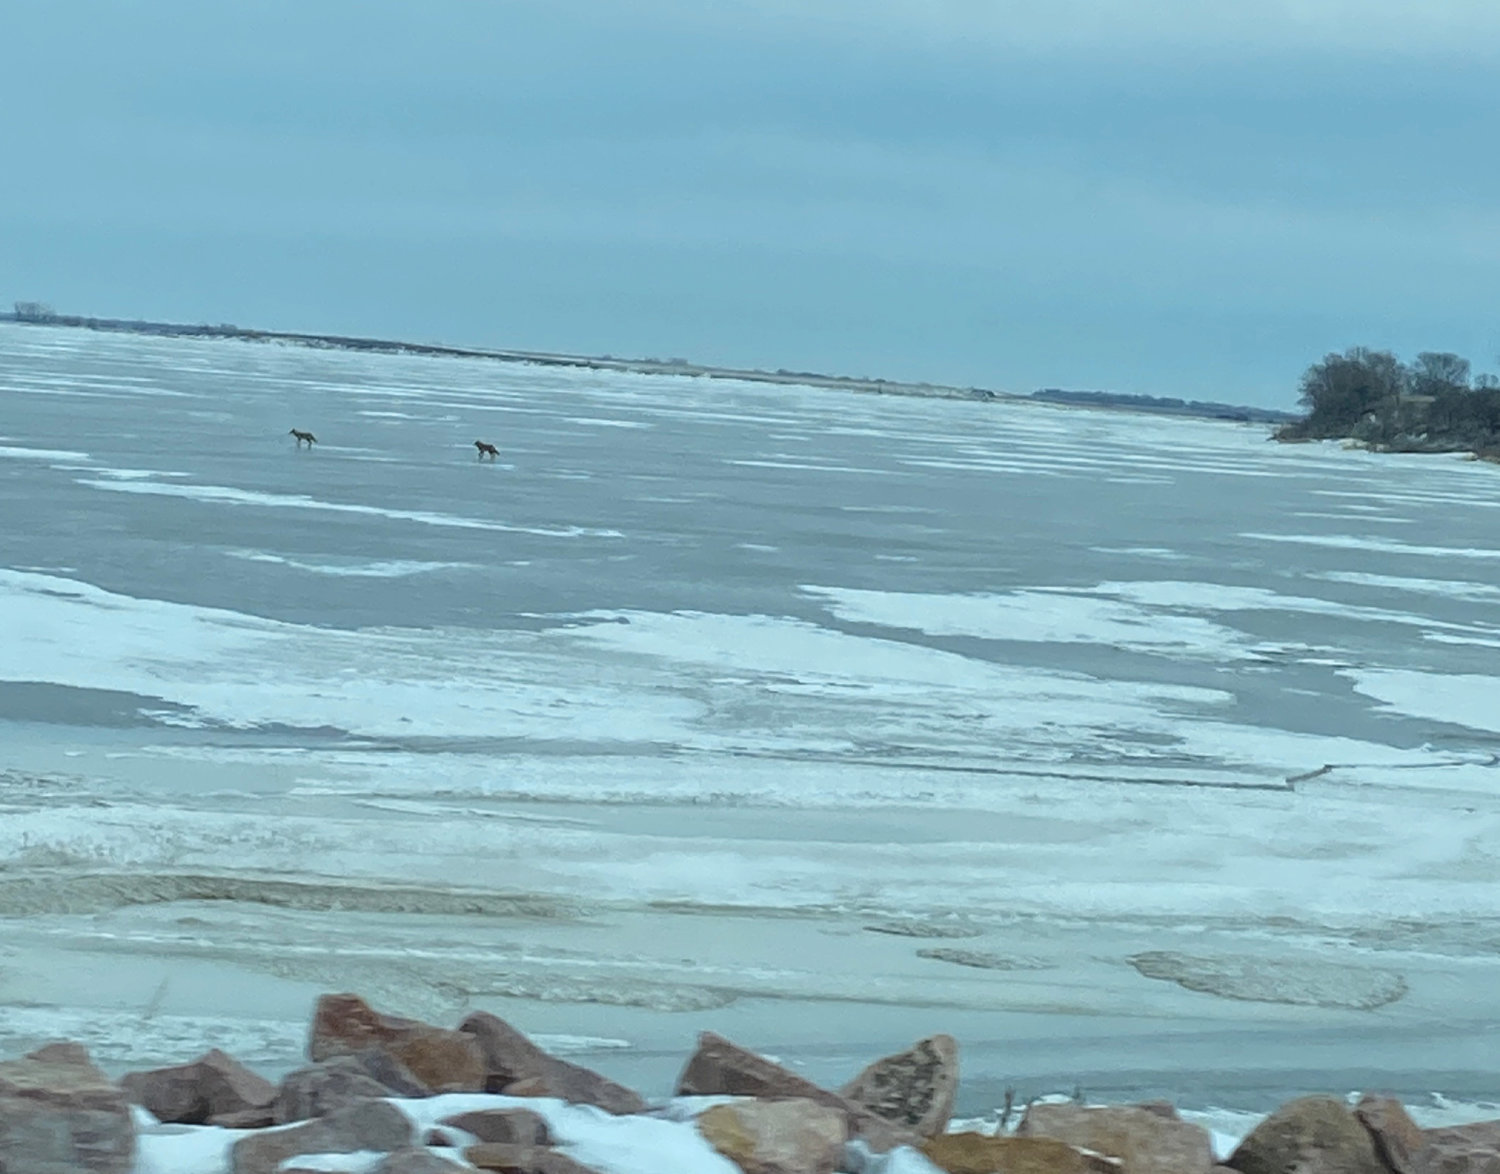 Two coyotes were seen walking their way across Lake Preston on Saturday afternoon.